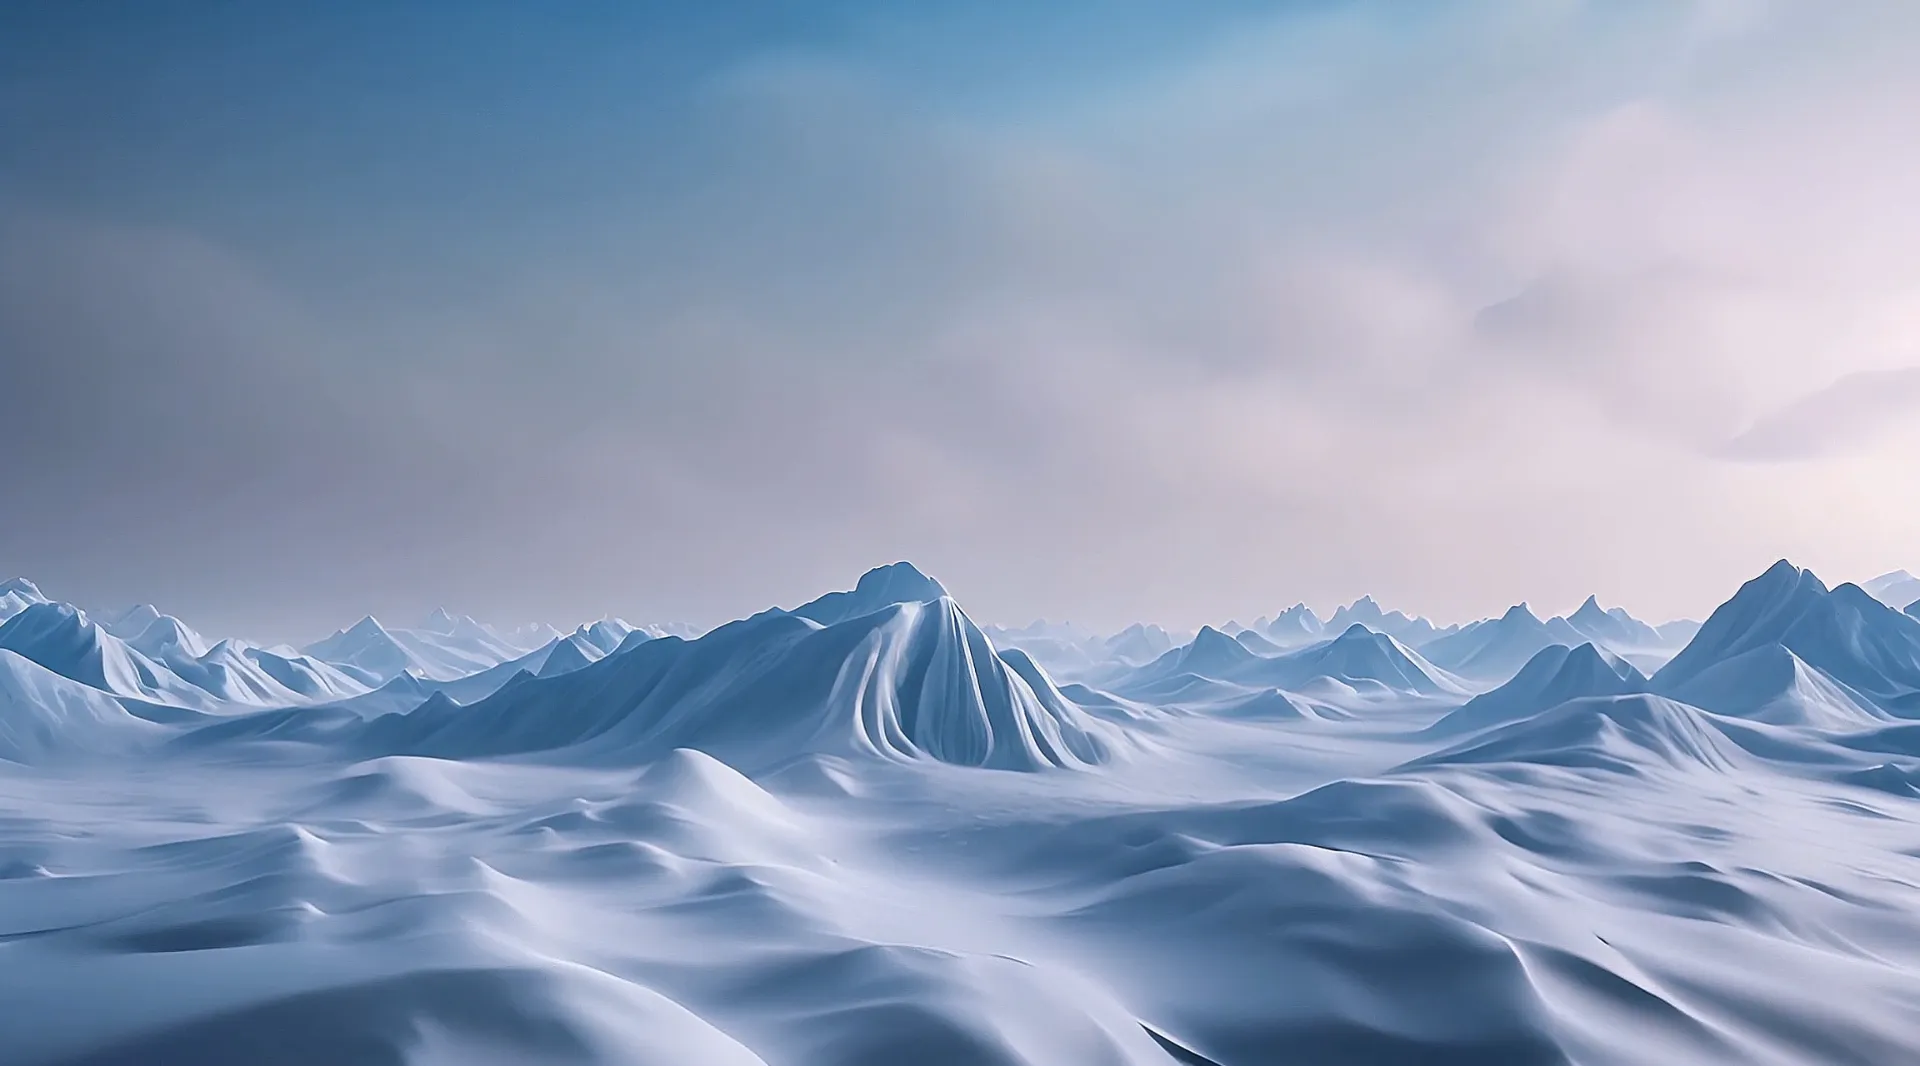 Gentle Snowy Range Tranquil Nature Video Backdrop